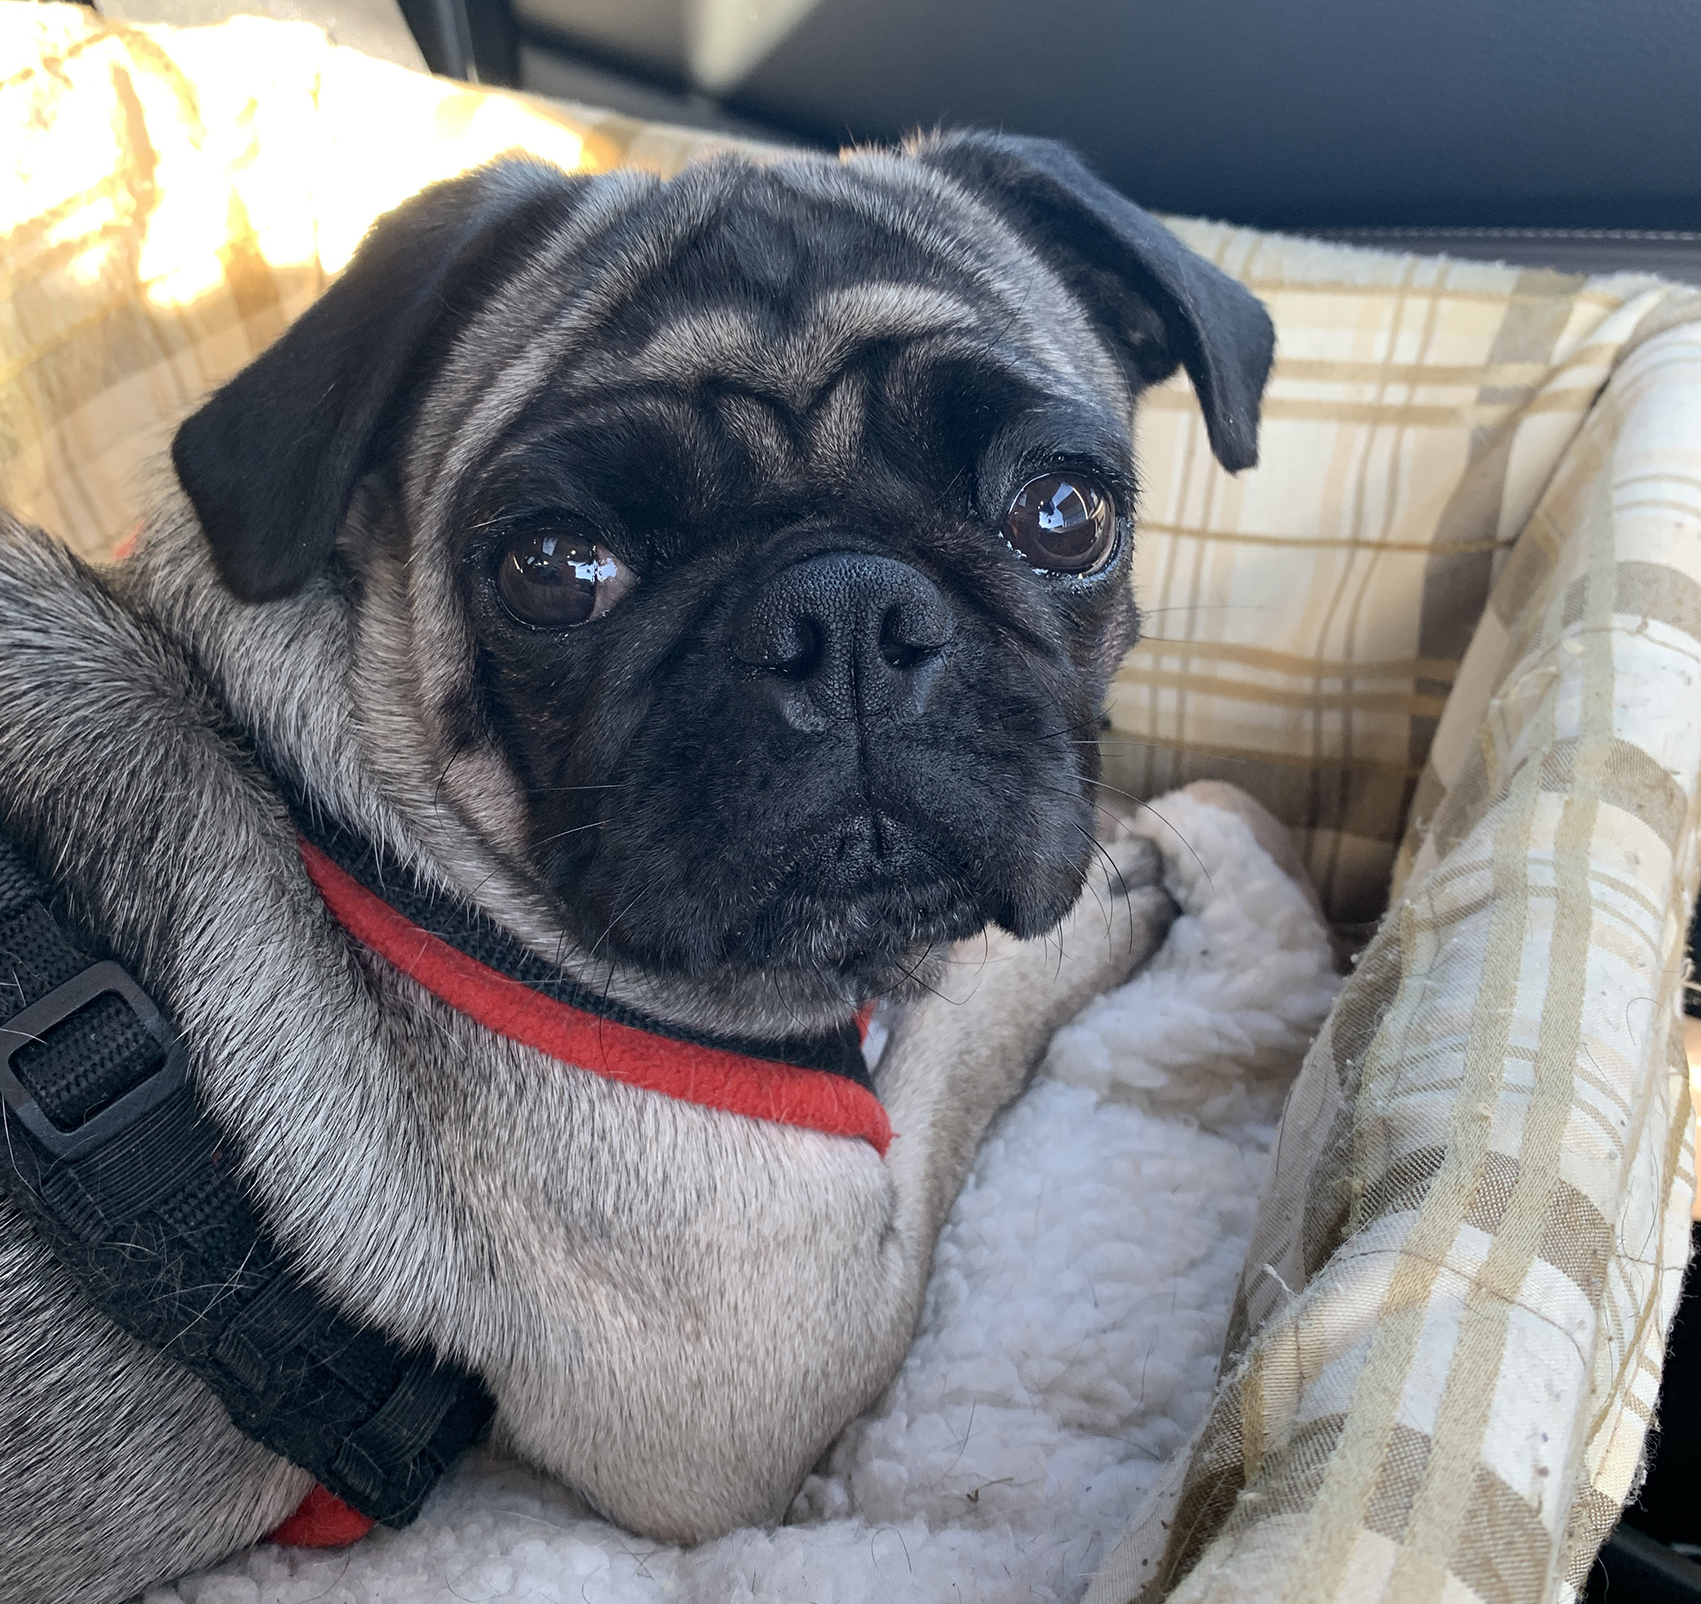 Gus goes into adoption! - image Wilma on https://pugprotectiontrust.org